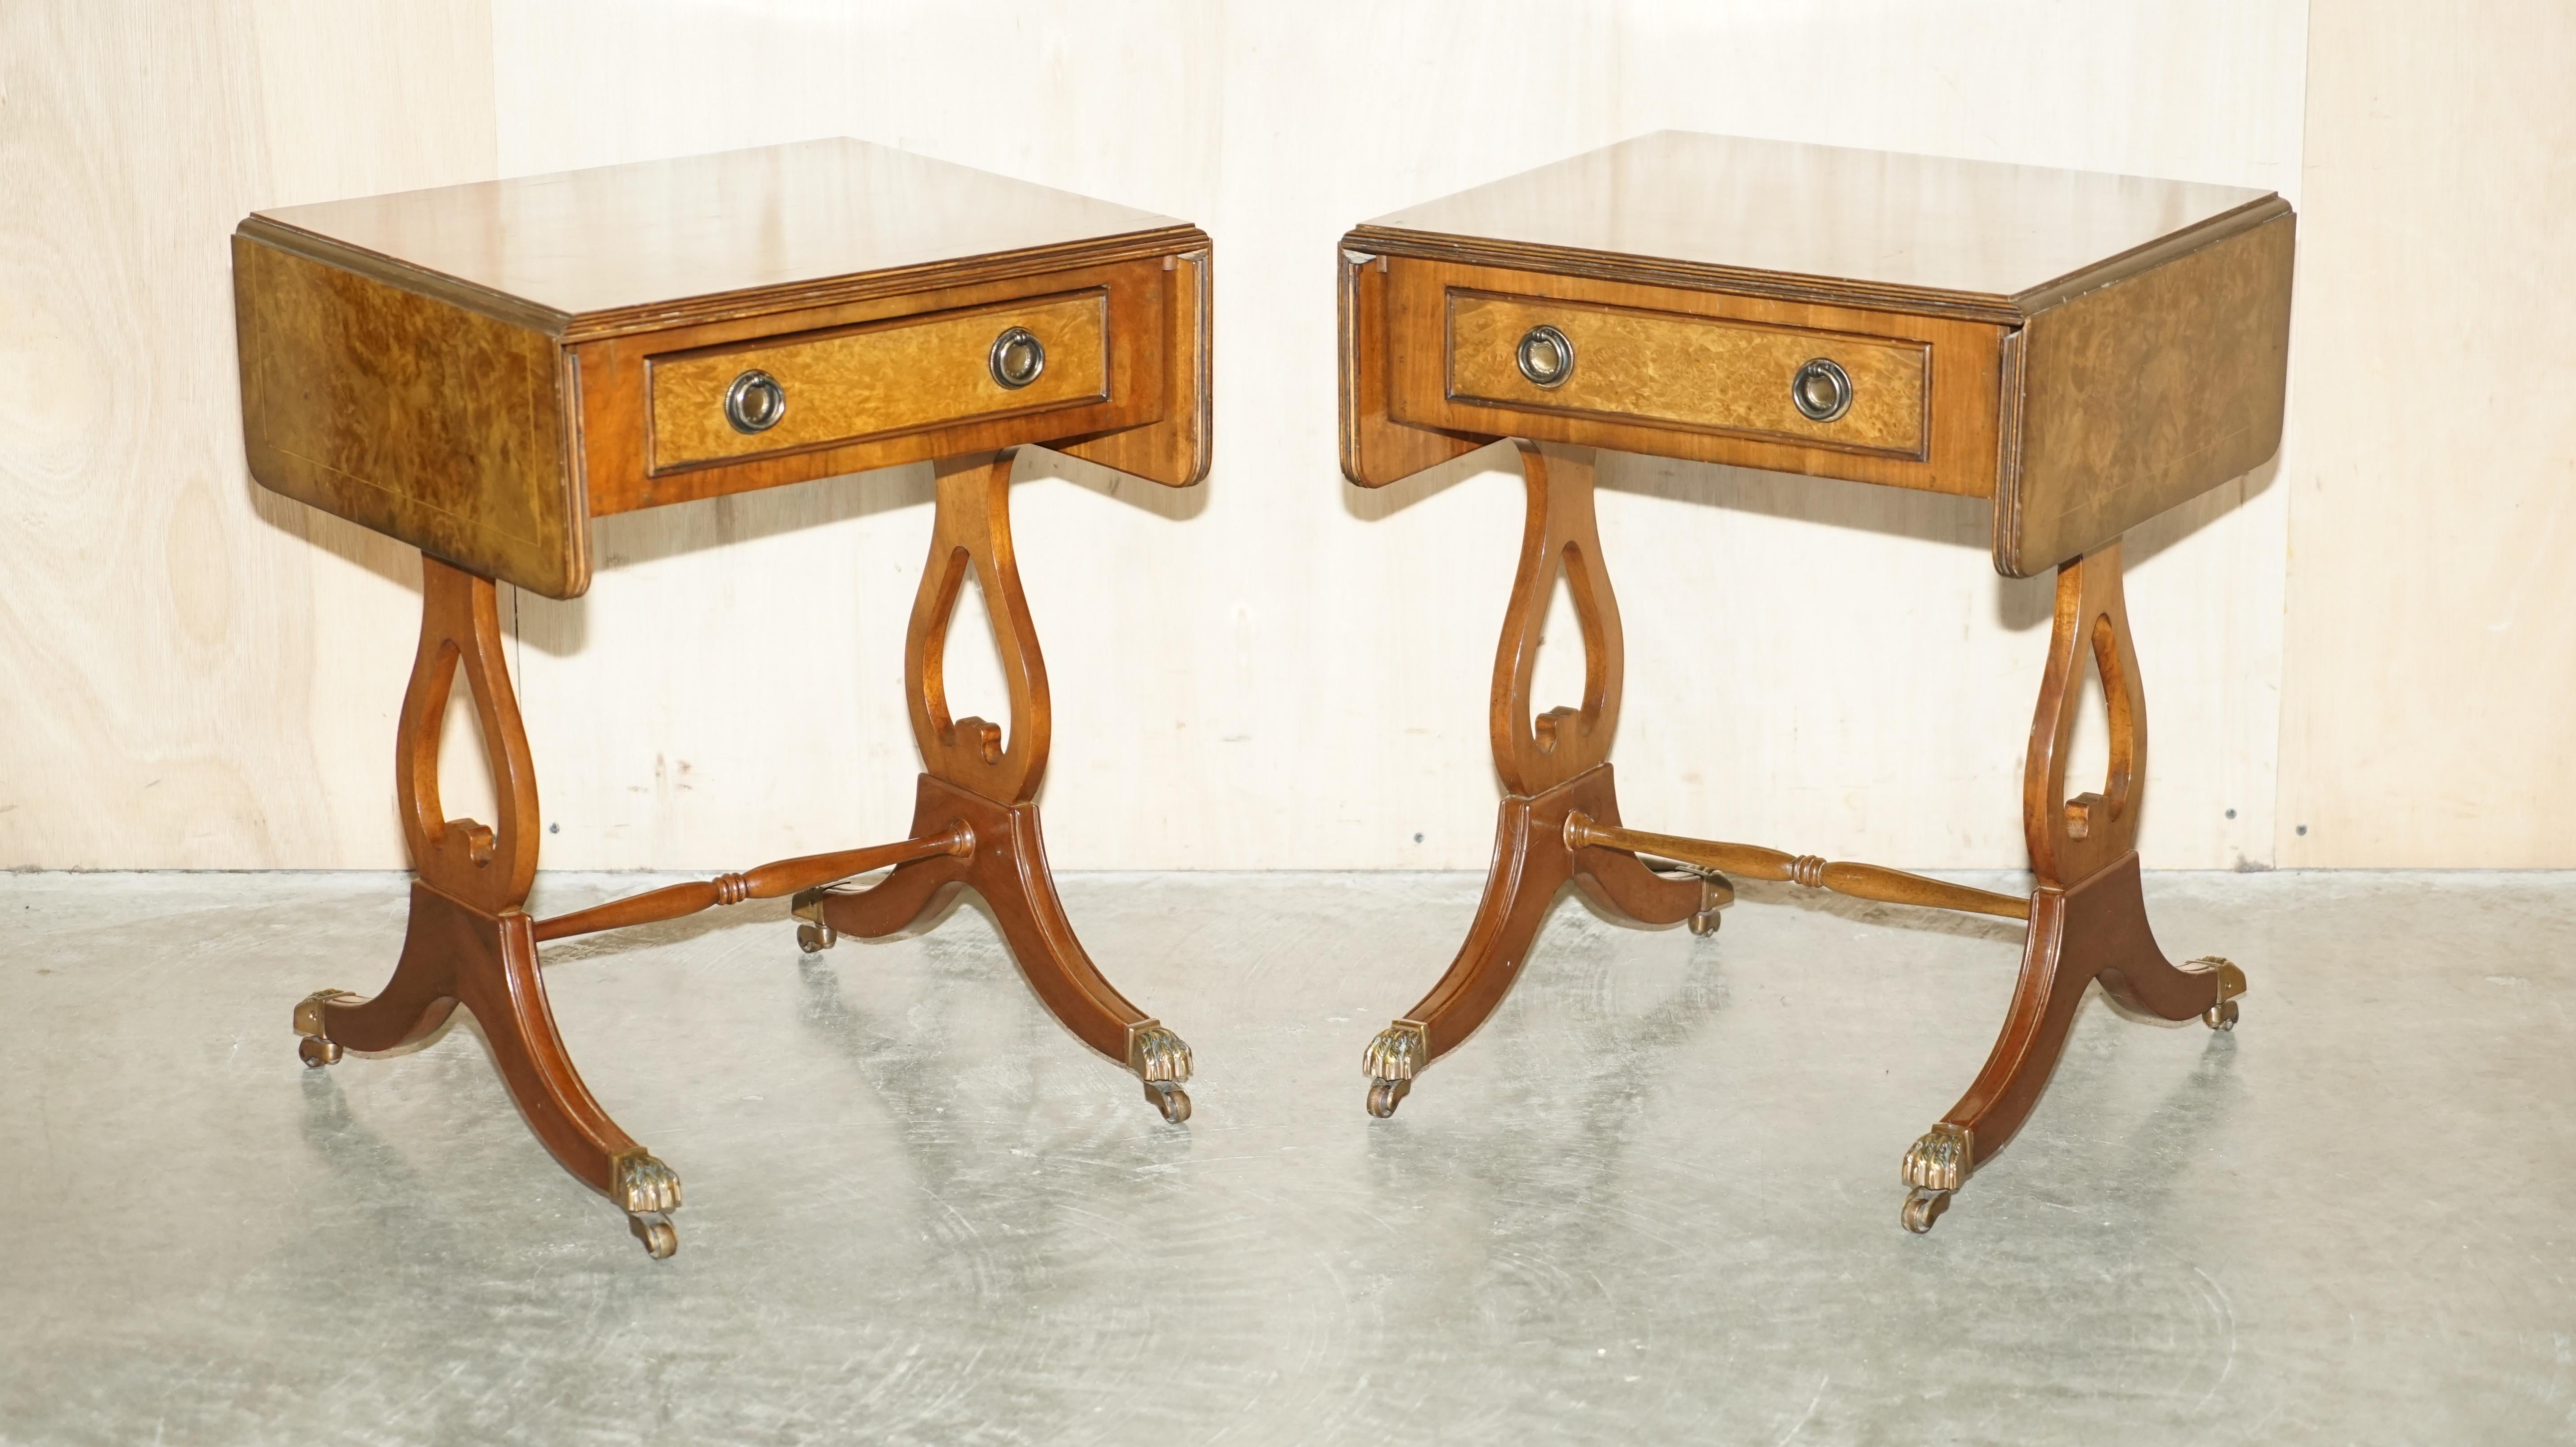 We are delighted to offer for sale this stunning and very rare pair of vintage, Burr & Burl Walnut side tables with extending top and single drawers 

A super decorative and well made pair, I have never seen them in Burr Walnut before, usually its